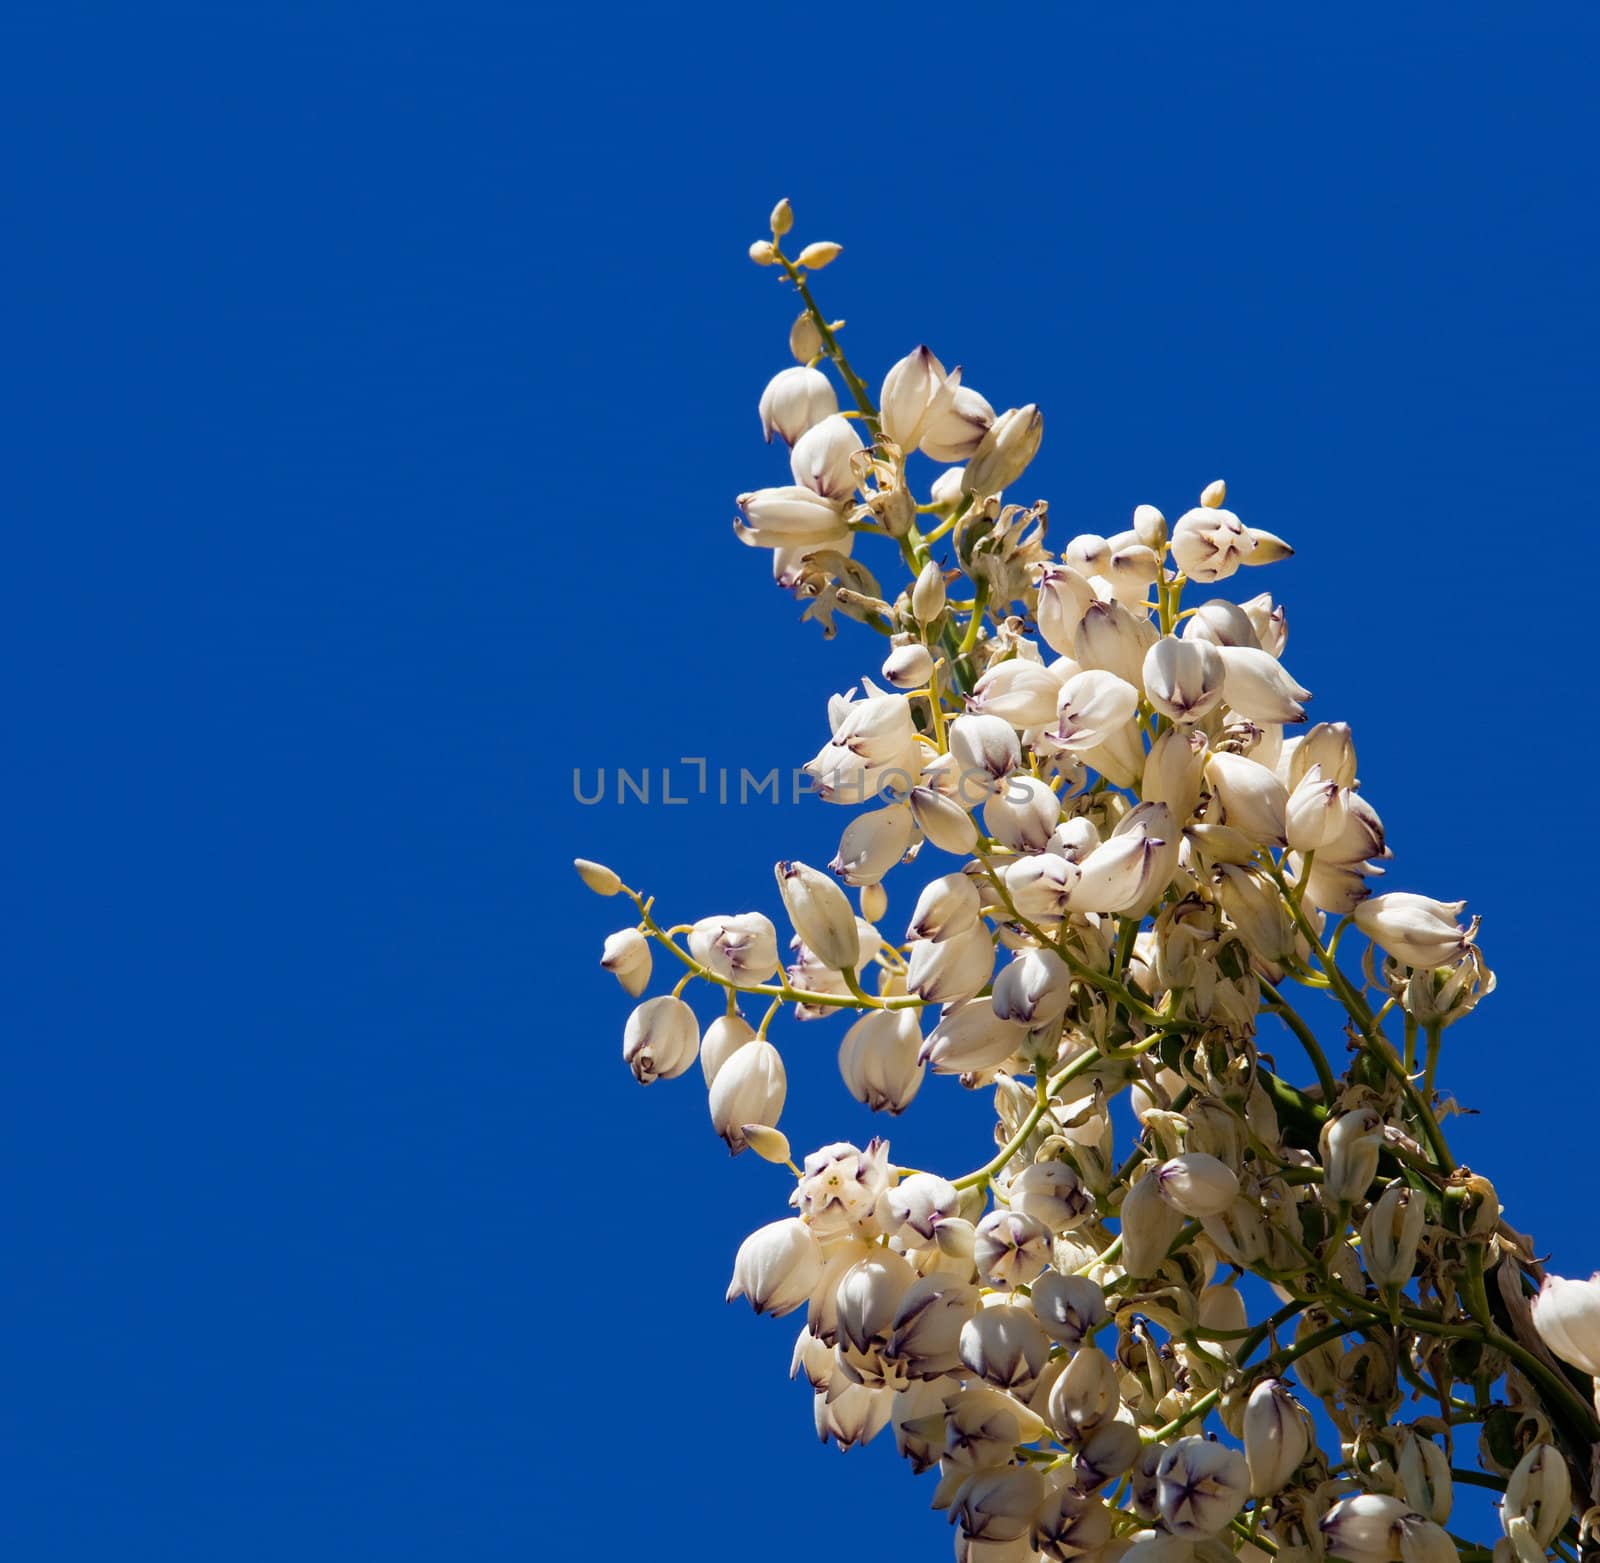 Mojave Yucca blossoms against blue sky by steheap